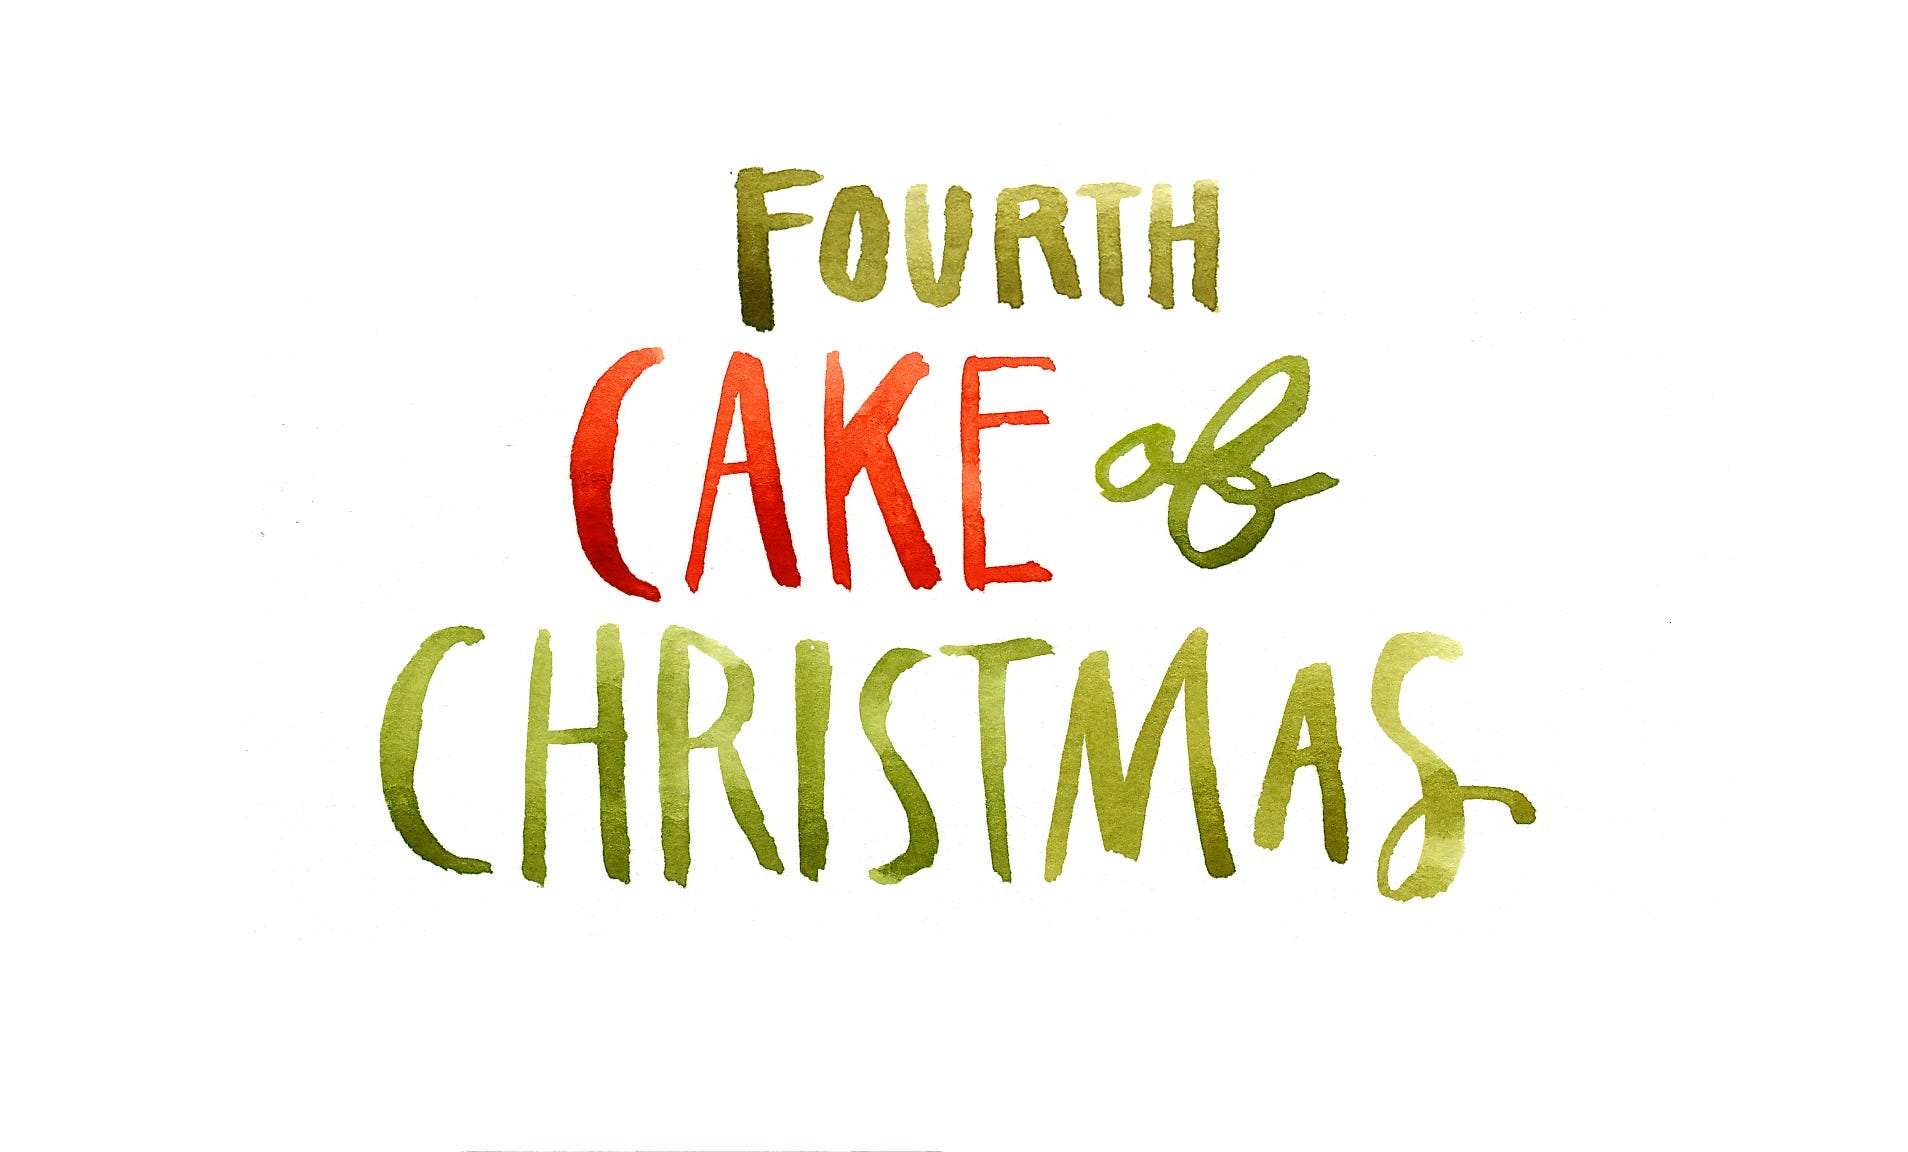 Twelve Cakes of Christmas, by Big Sur Bakery